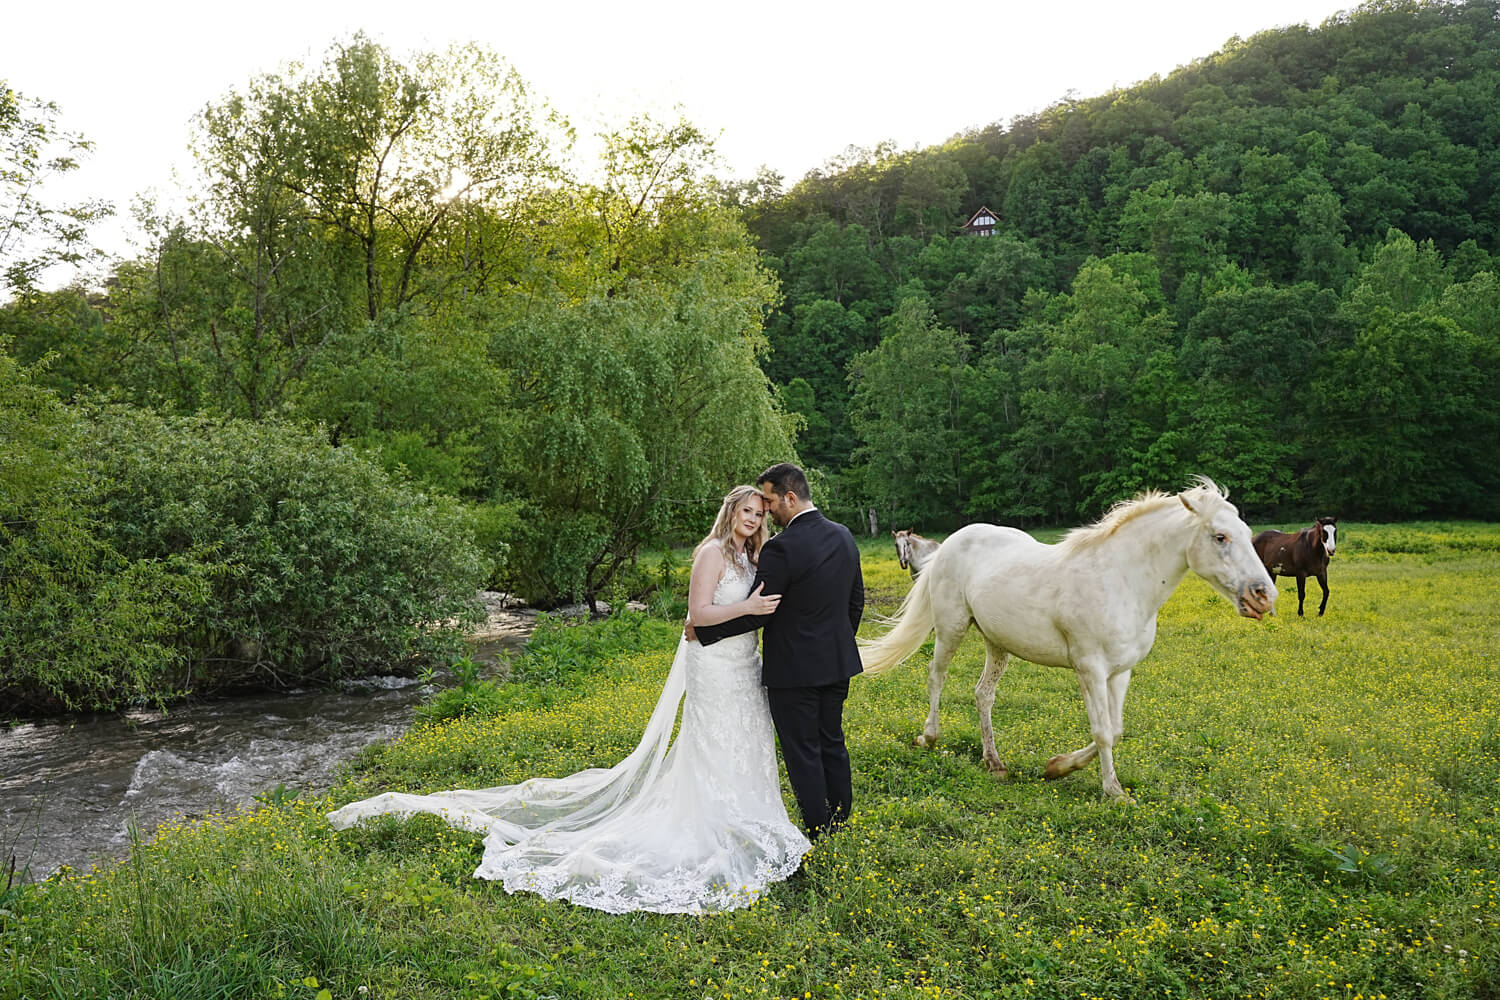 bride leaning into her groom in a field of yellow buttercups as a white appaloosa horse walks past